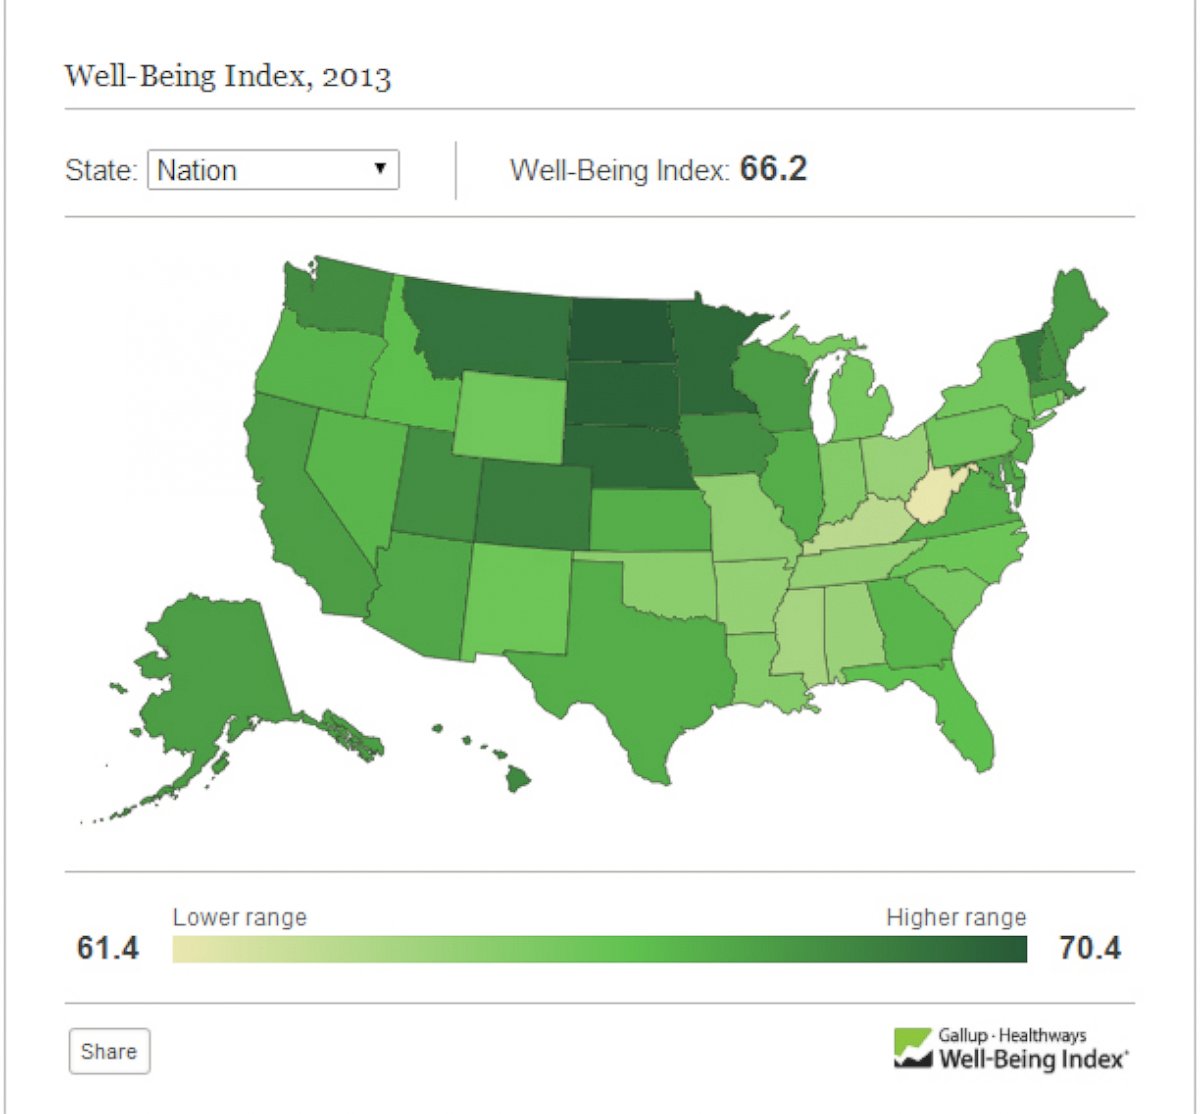 PHOTO: A map of the United States show the results of Gallup's "Well-Being Index" for 2013.